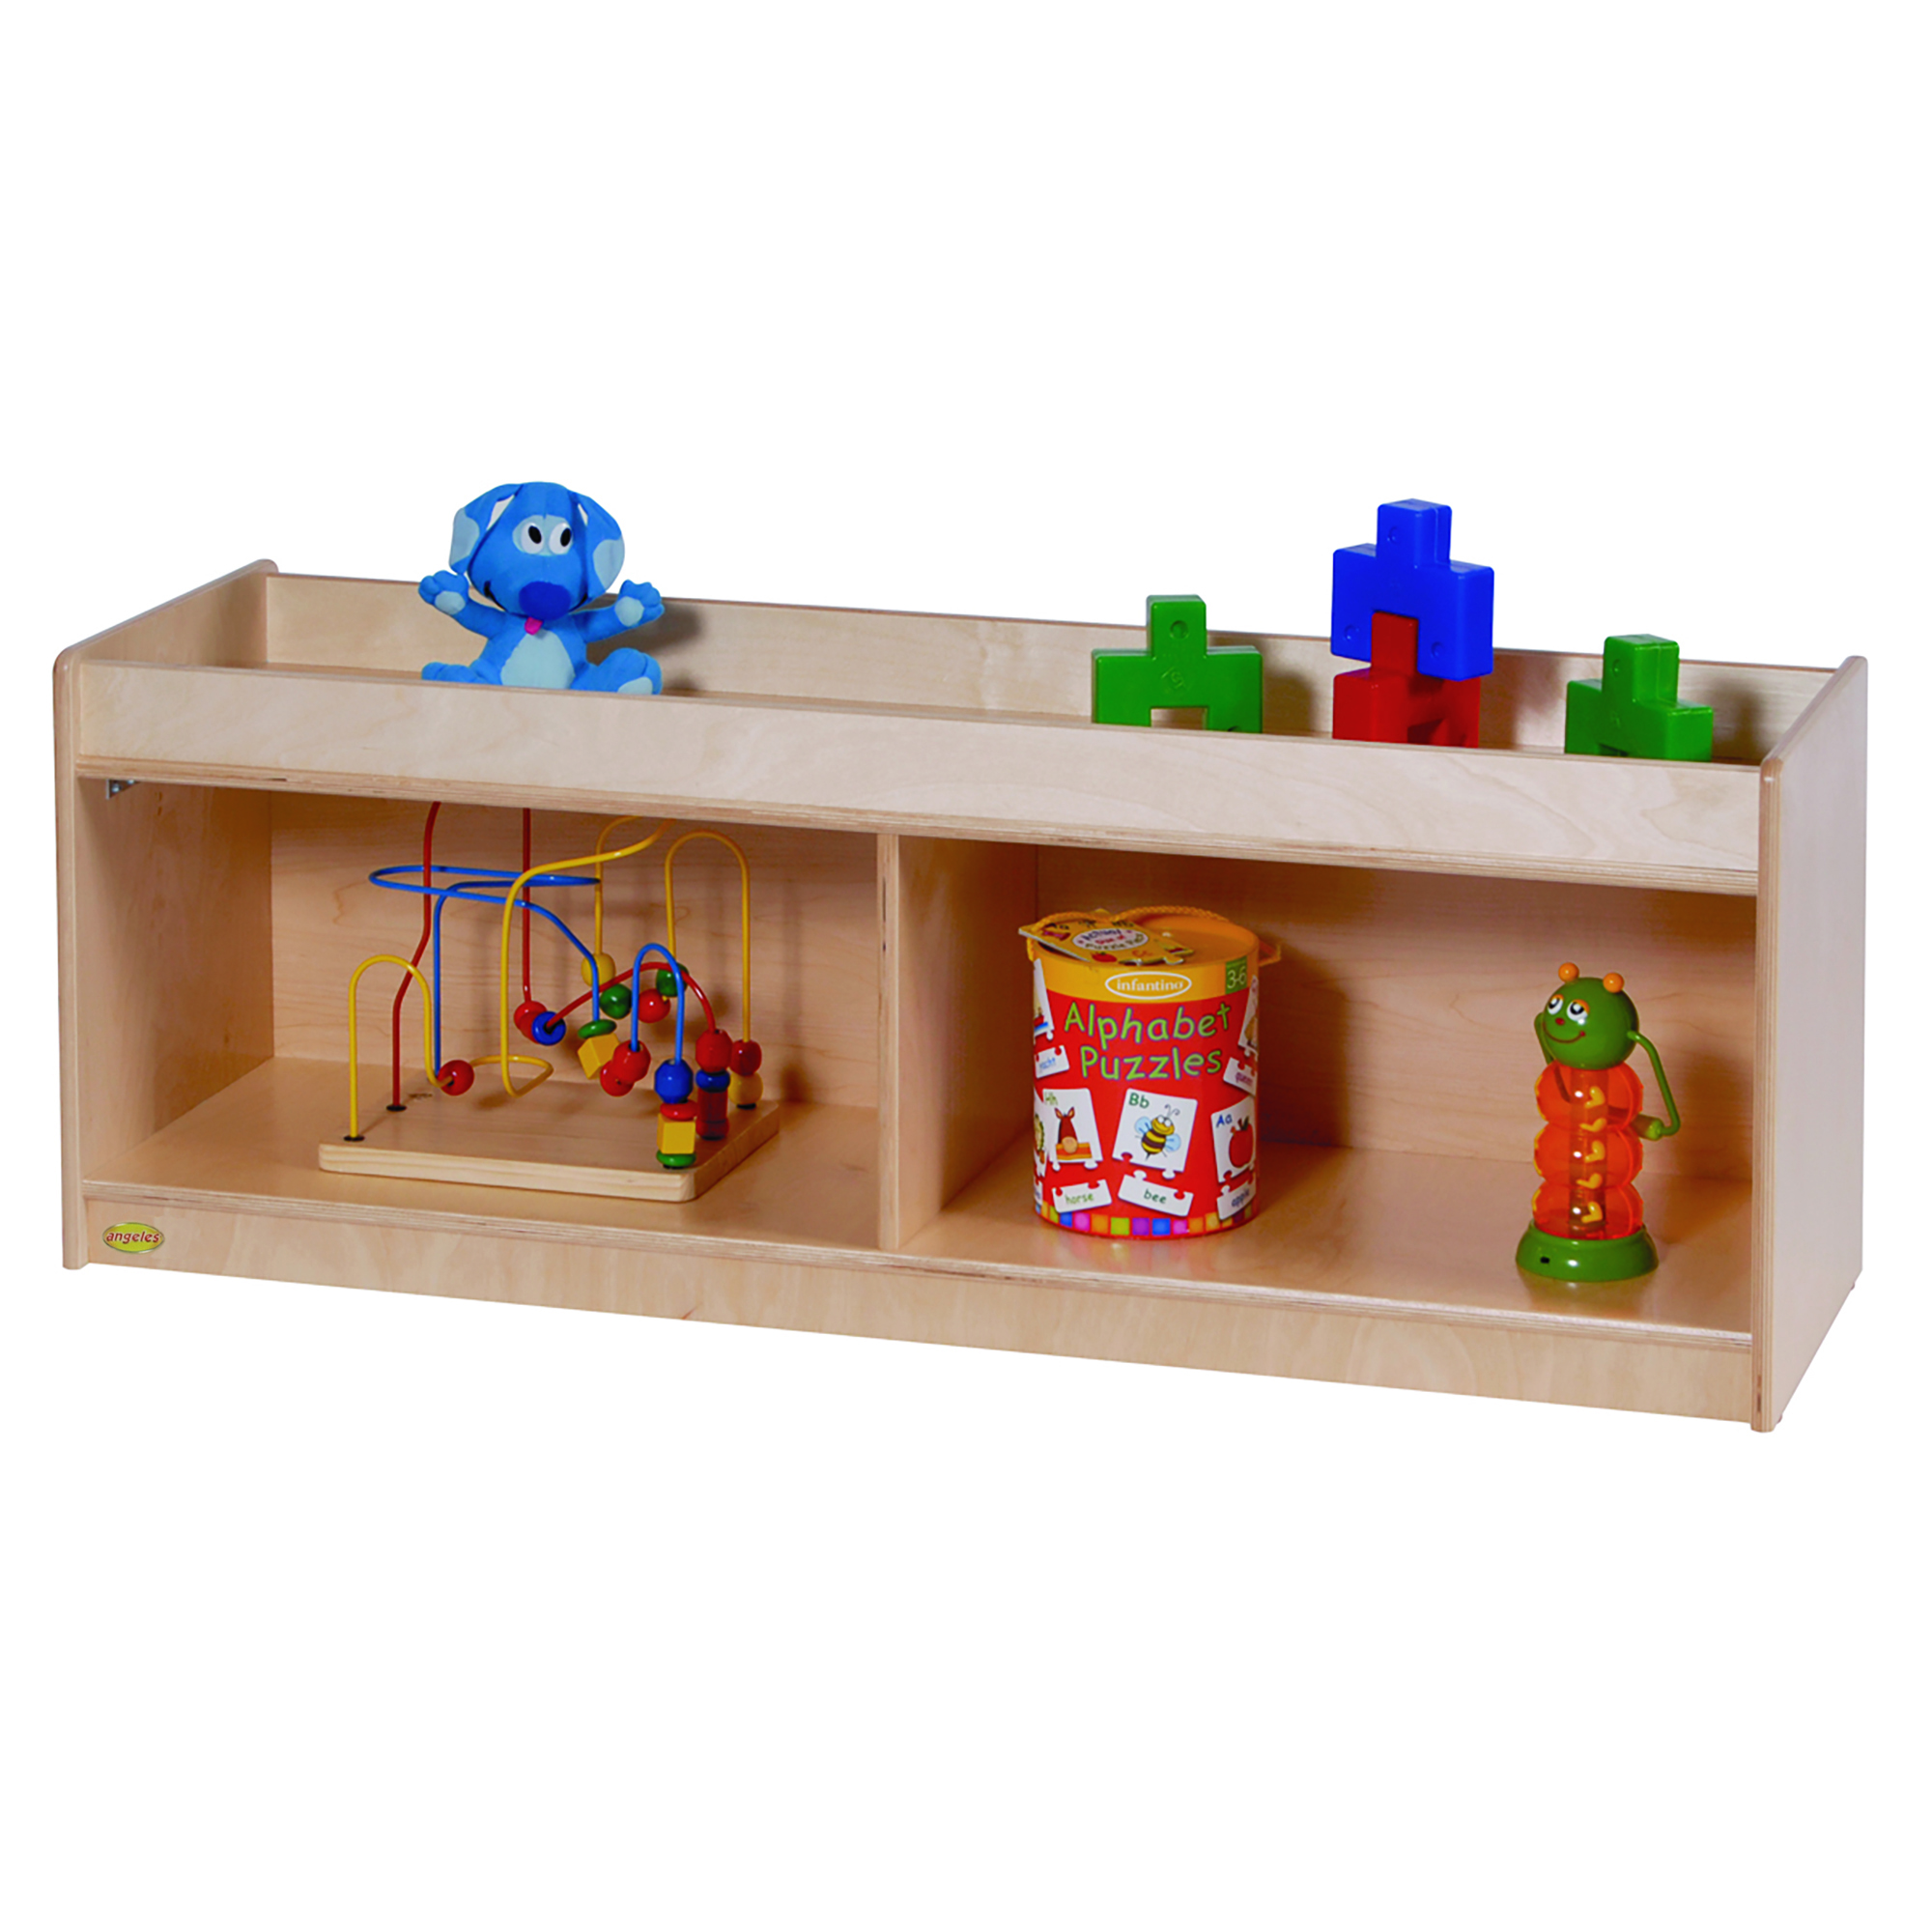 Toddler Storage with Mirror Back